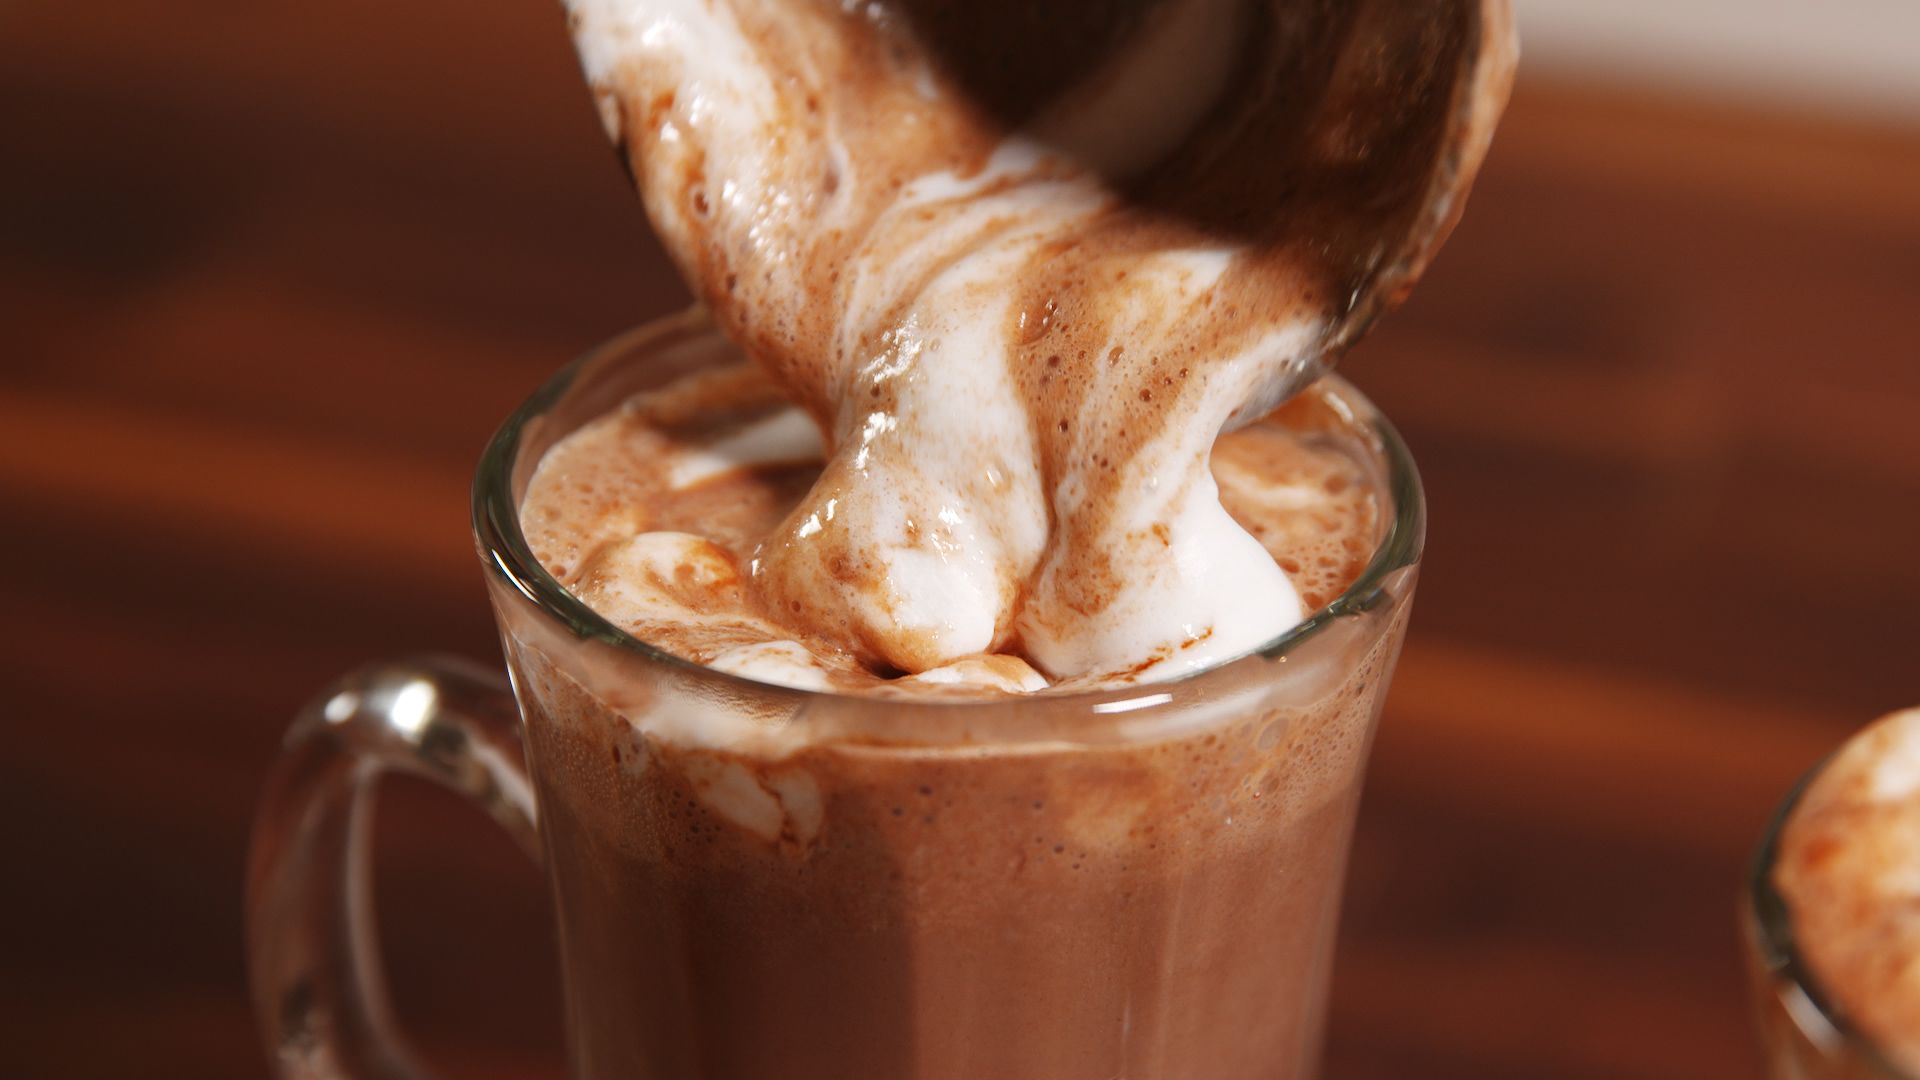 Easy Slow Cooker Hot Cocoa To Make Hot Chocolate In Your Slow Cooker